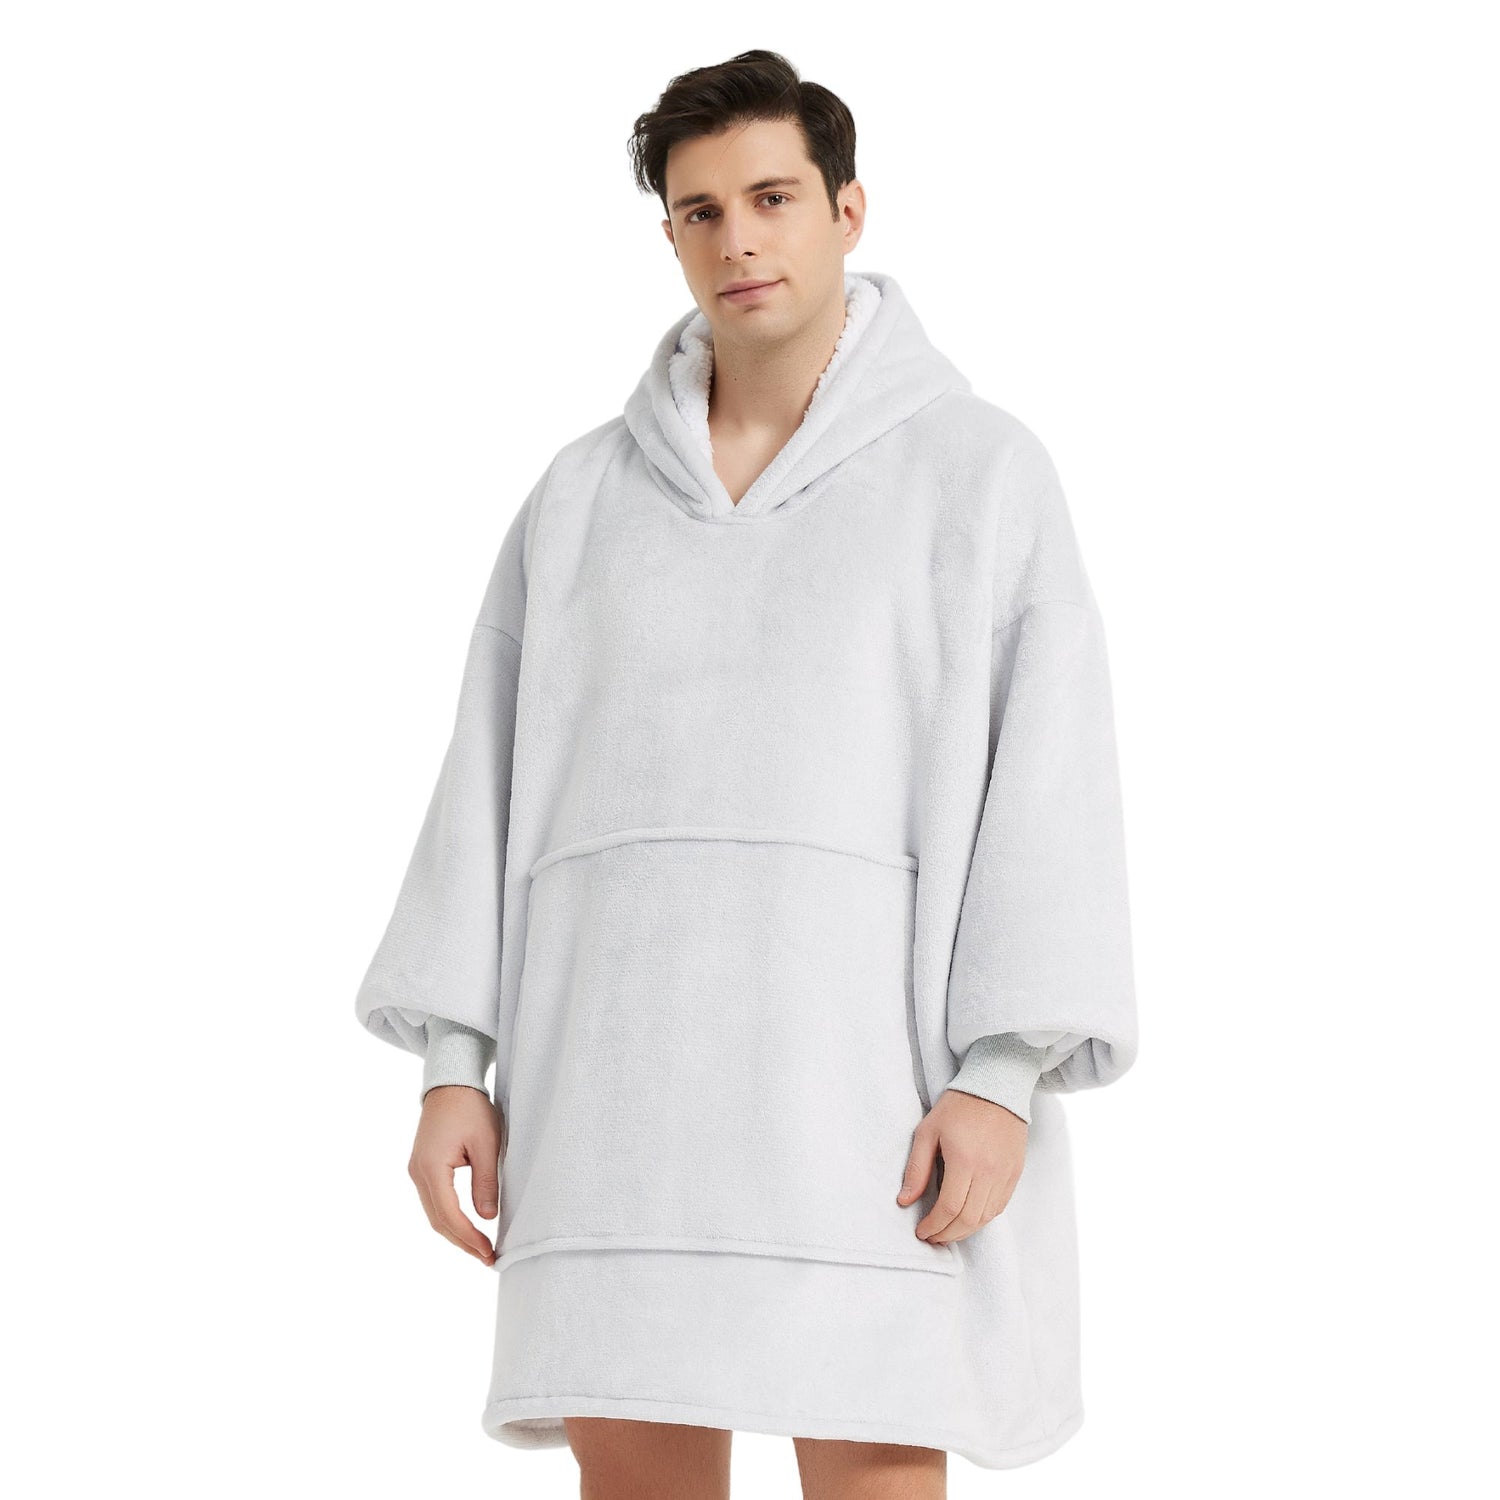 Pull Plaid Homme blanc argent Sweat Polaire Géant flanelle microfibre polyester The Oversized Hoodie